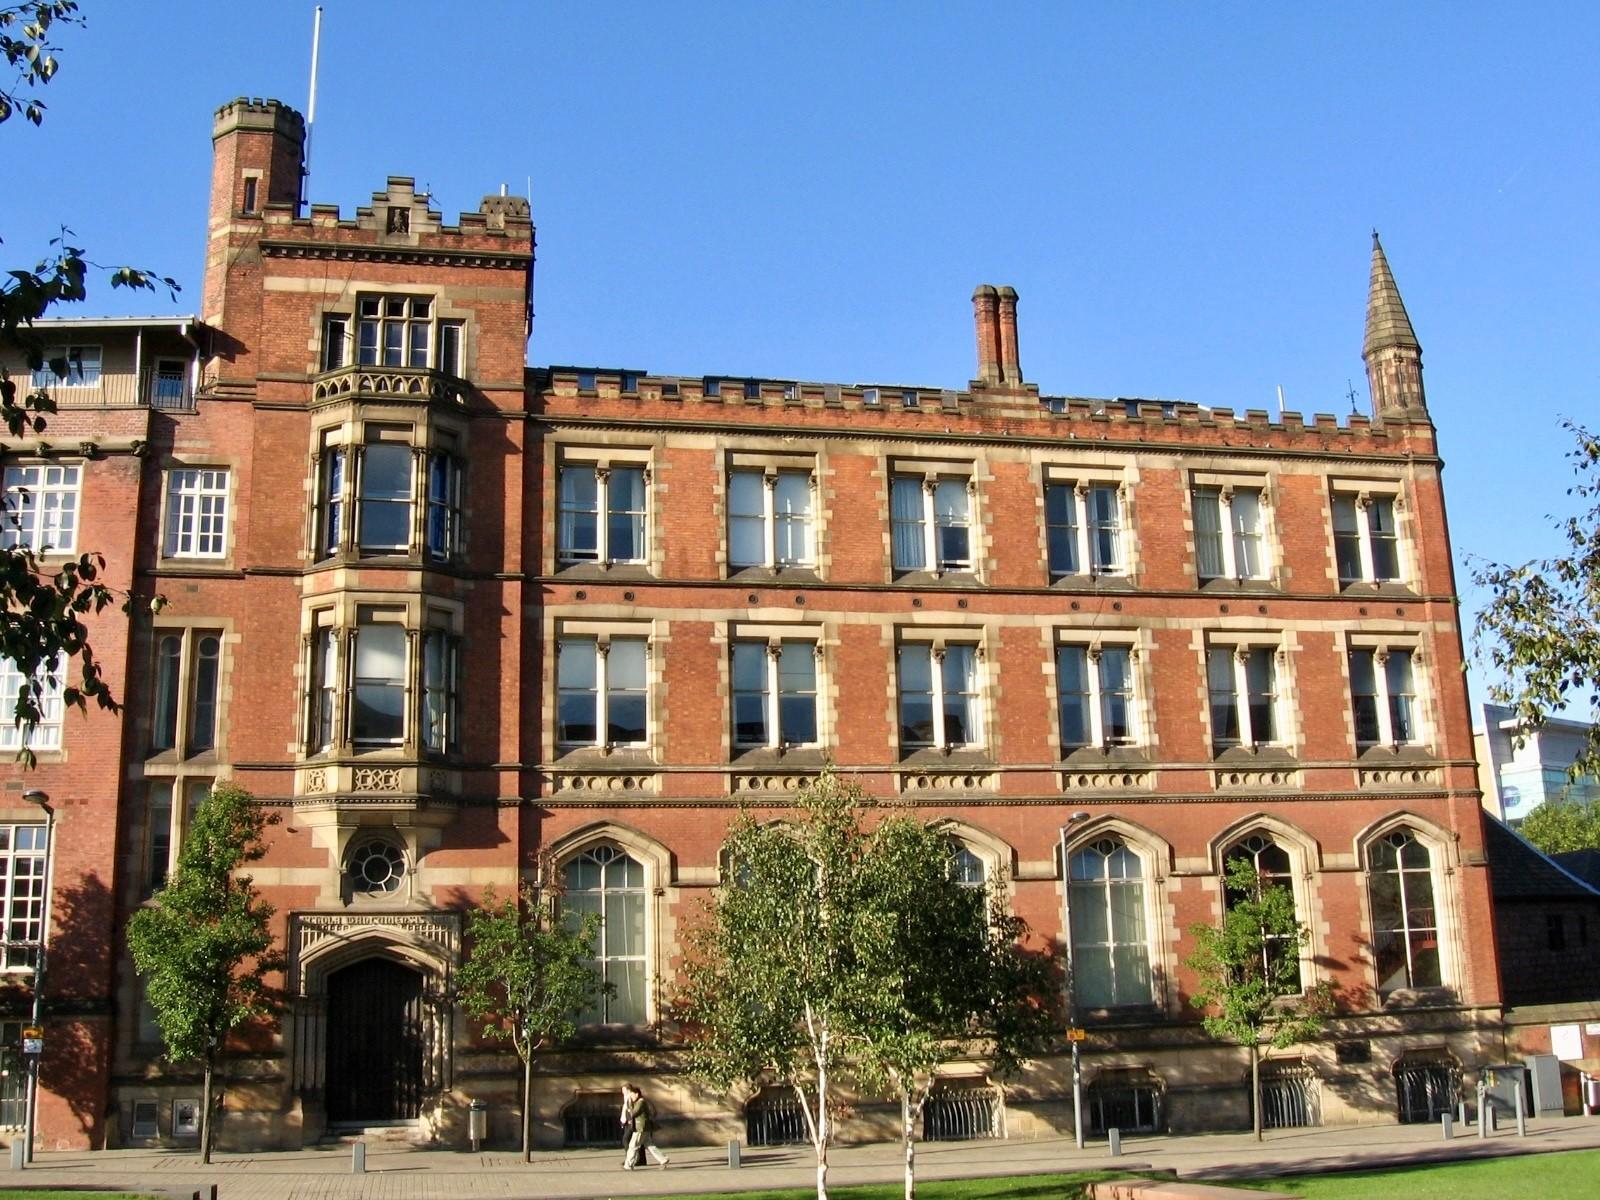 External image of a very large and proud Victorian building. It is three storeys with feature arch windows at the ground floor. 